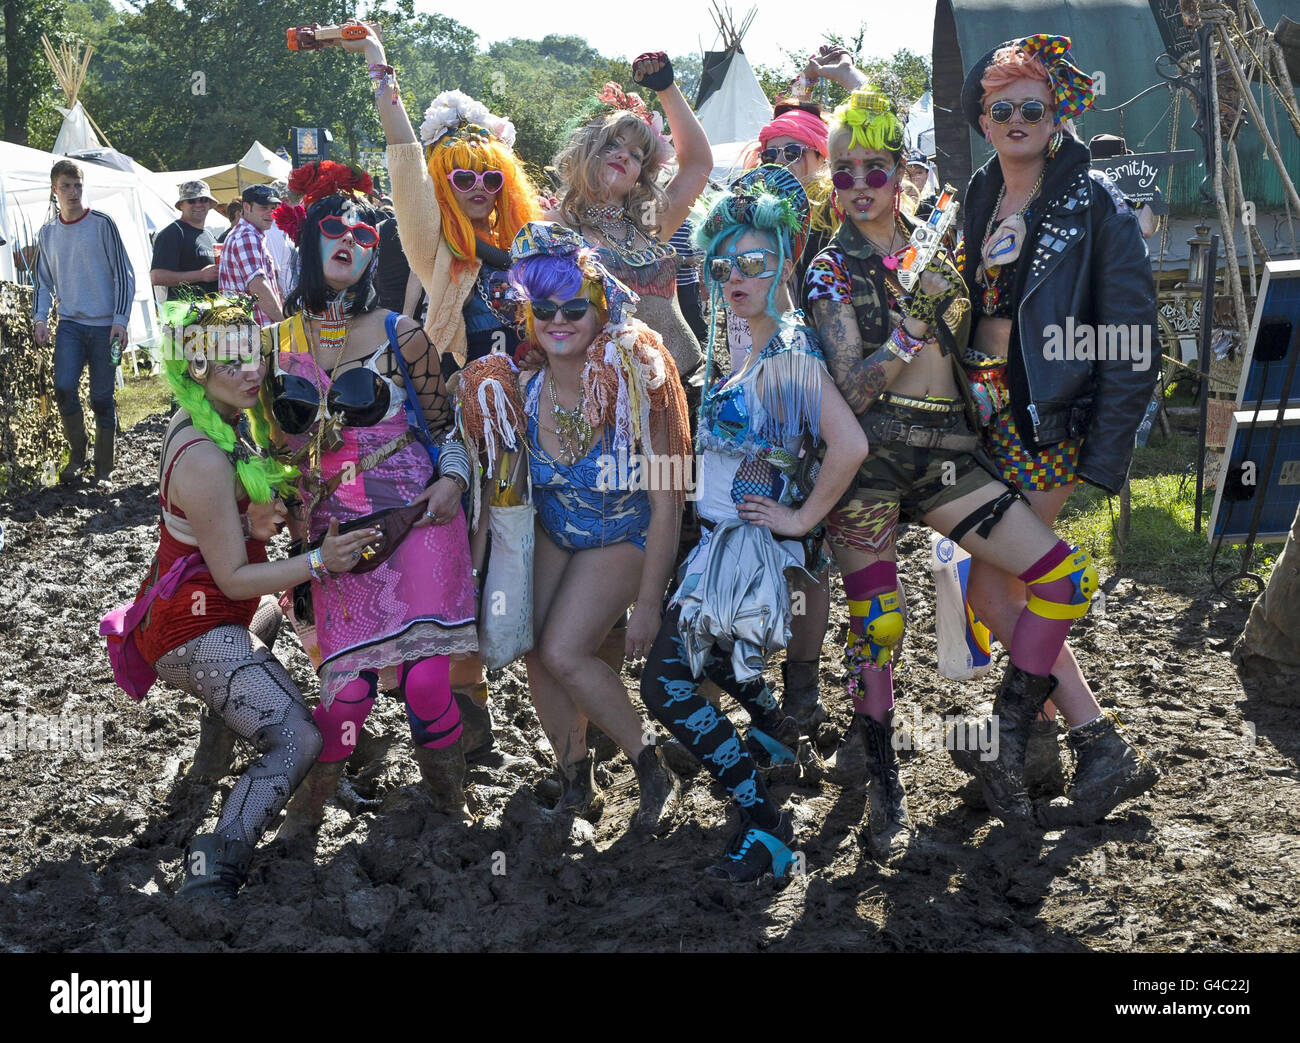 Revellers pose for a photograph at Glastonbury music festival at Worthy Farm, Pilton, Somerset. Stock Photo